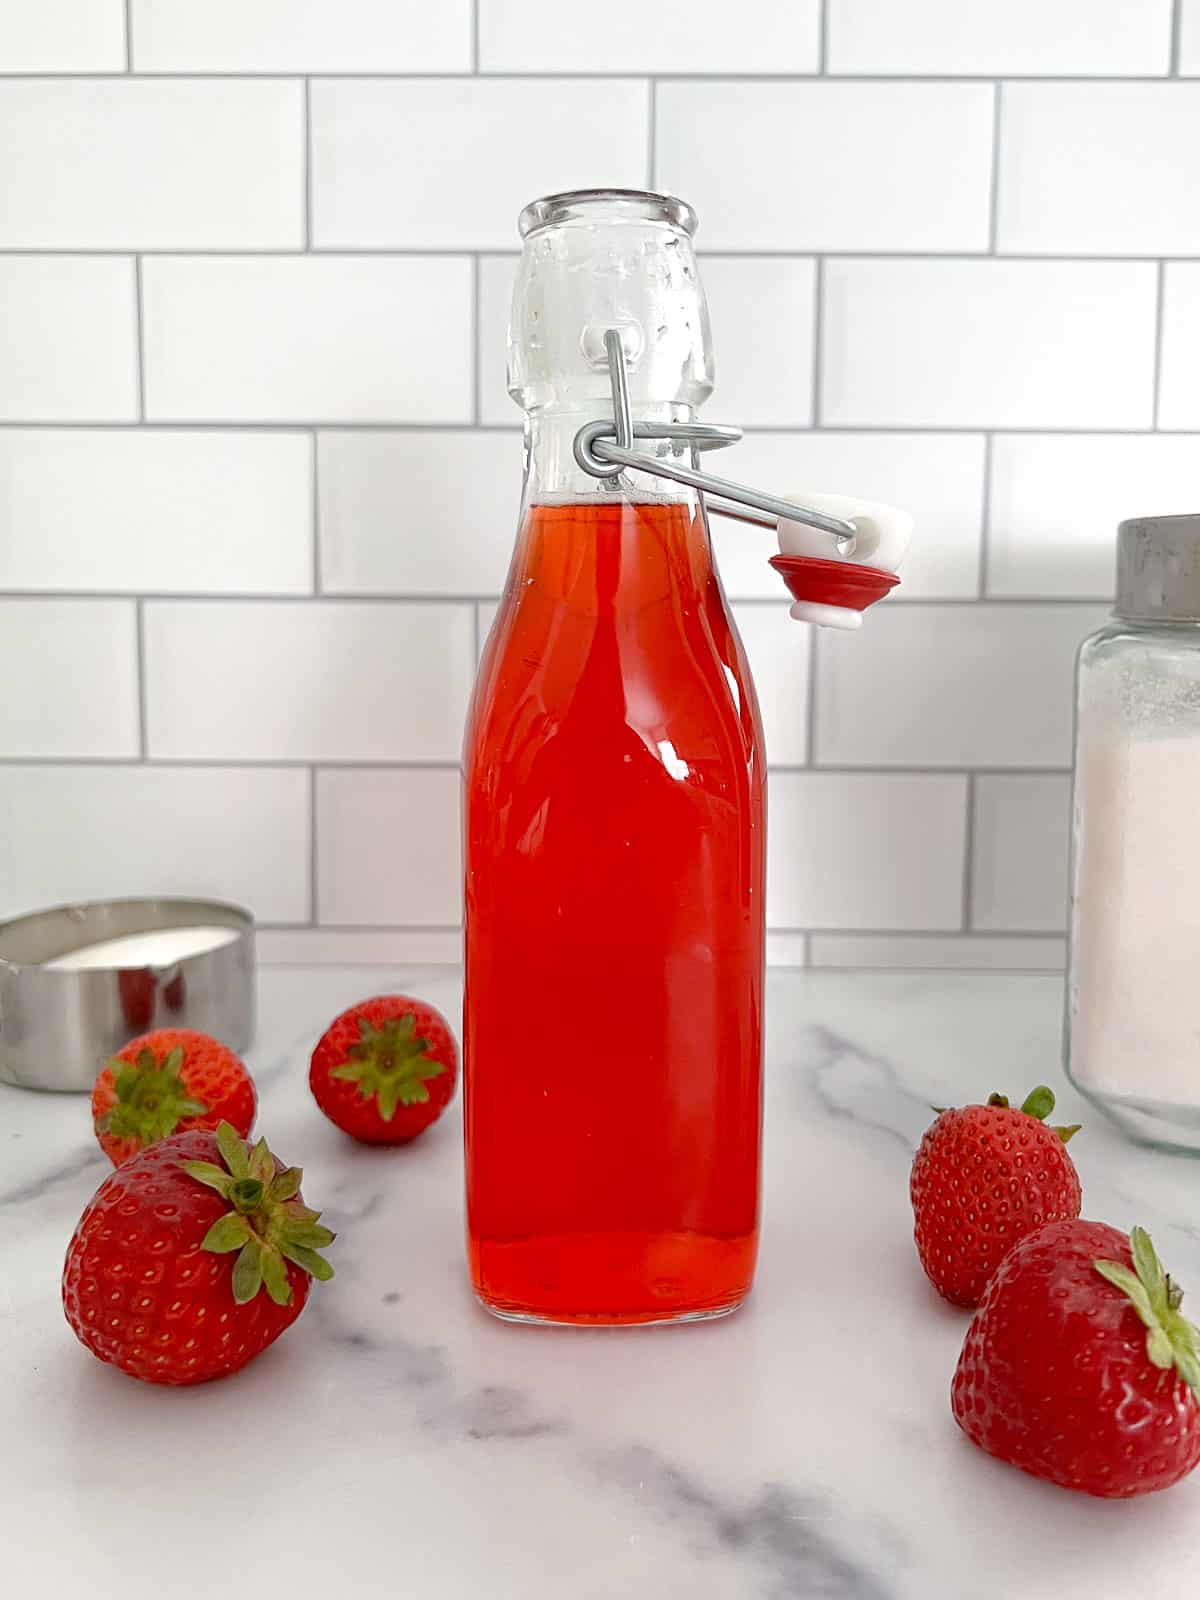 Homemade strawberry simple syrup in a glass bottle with open lid and sugar on the side.
